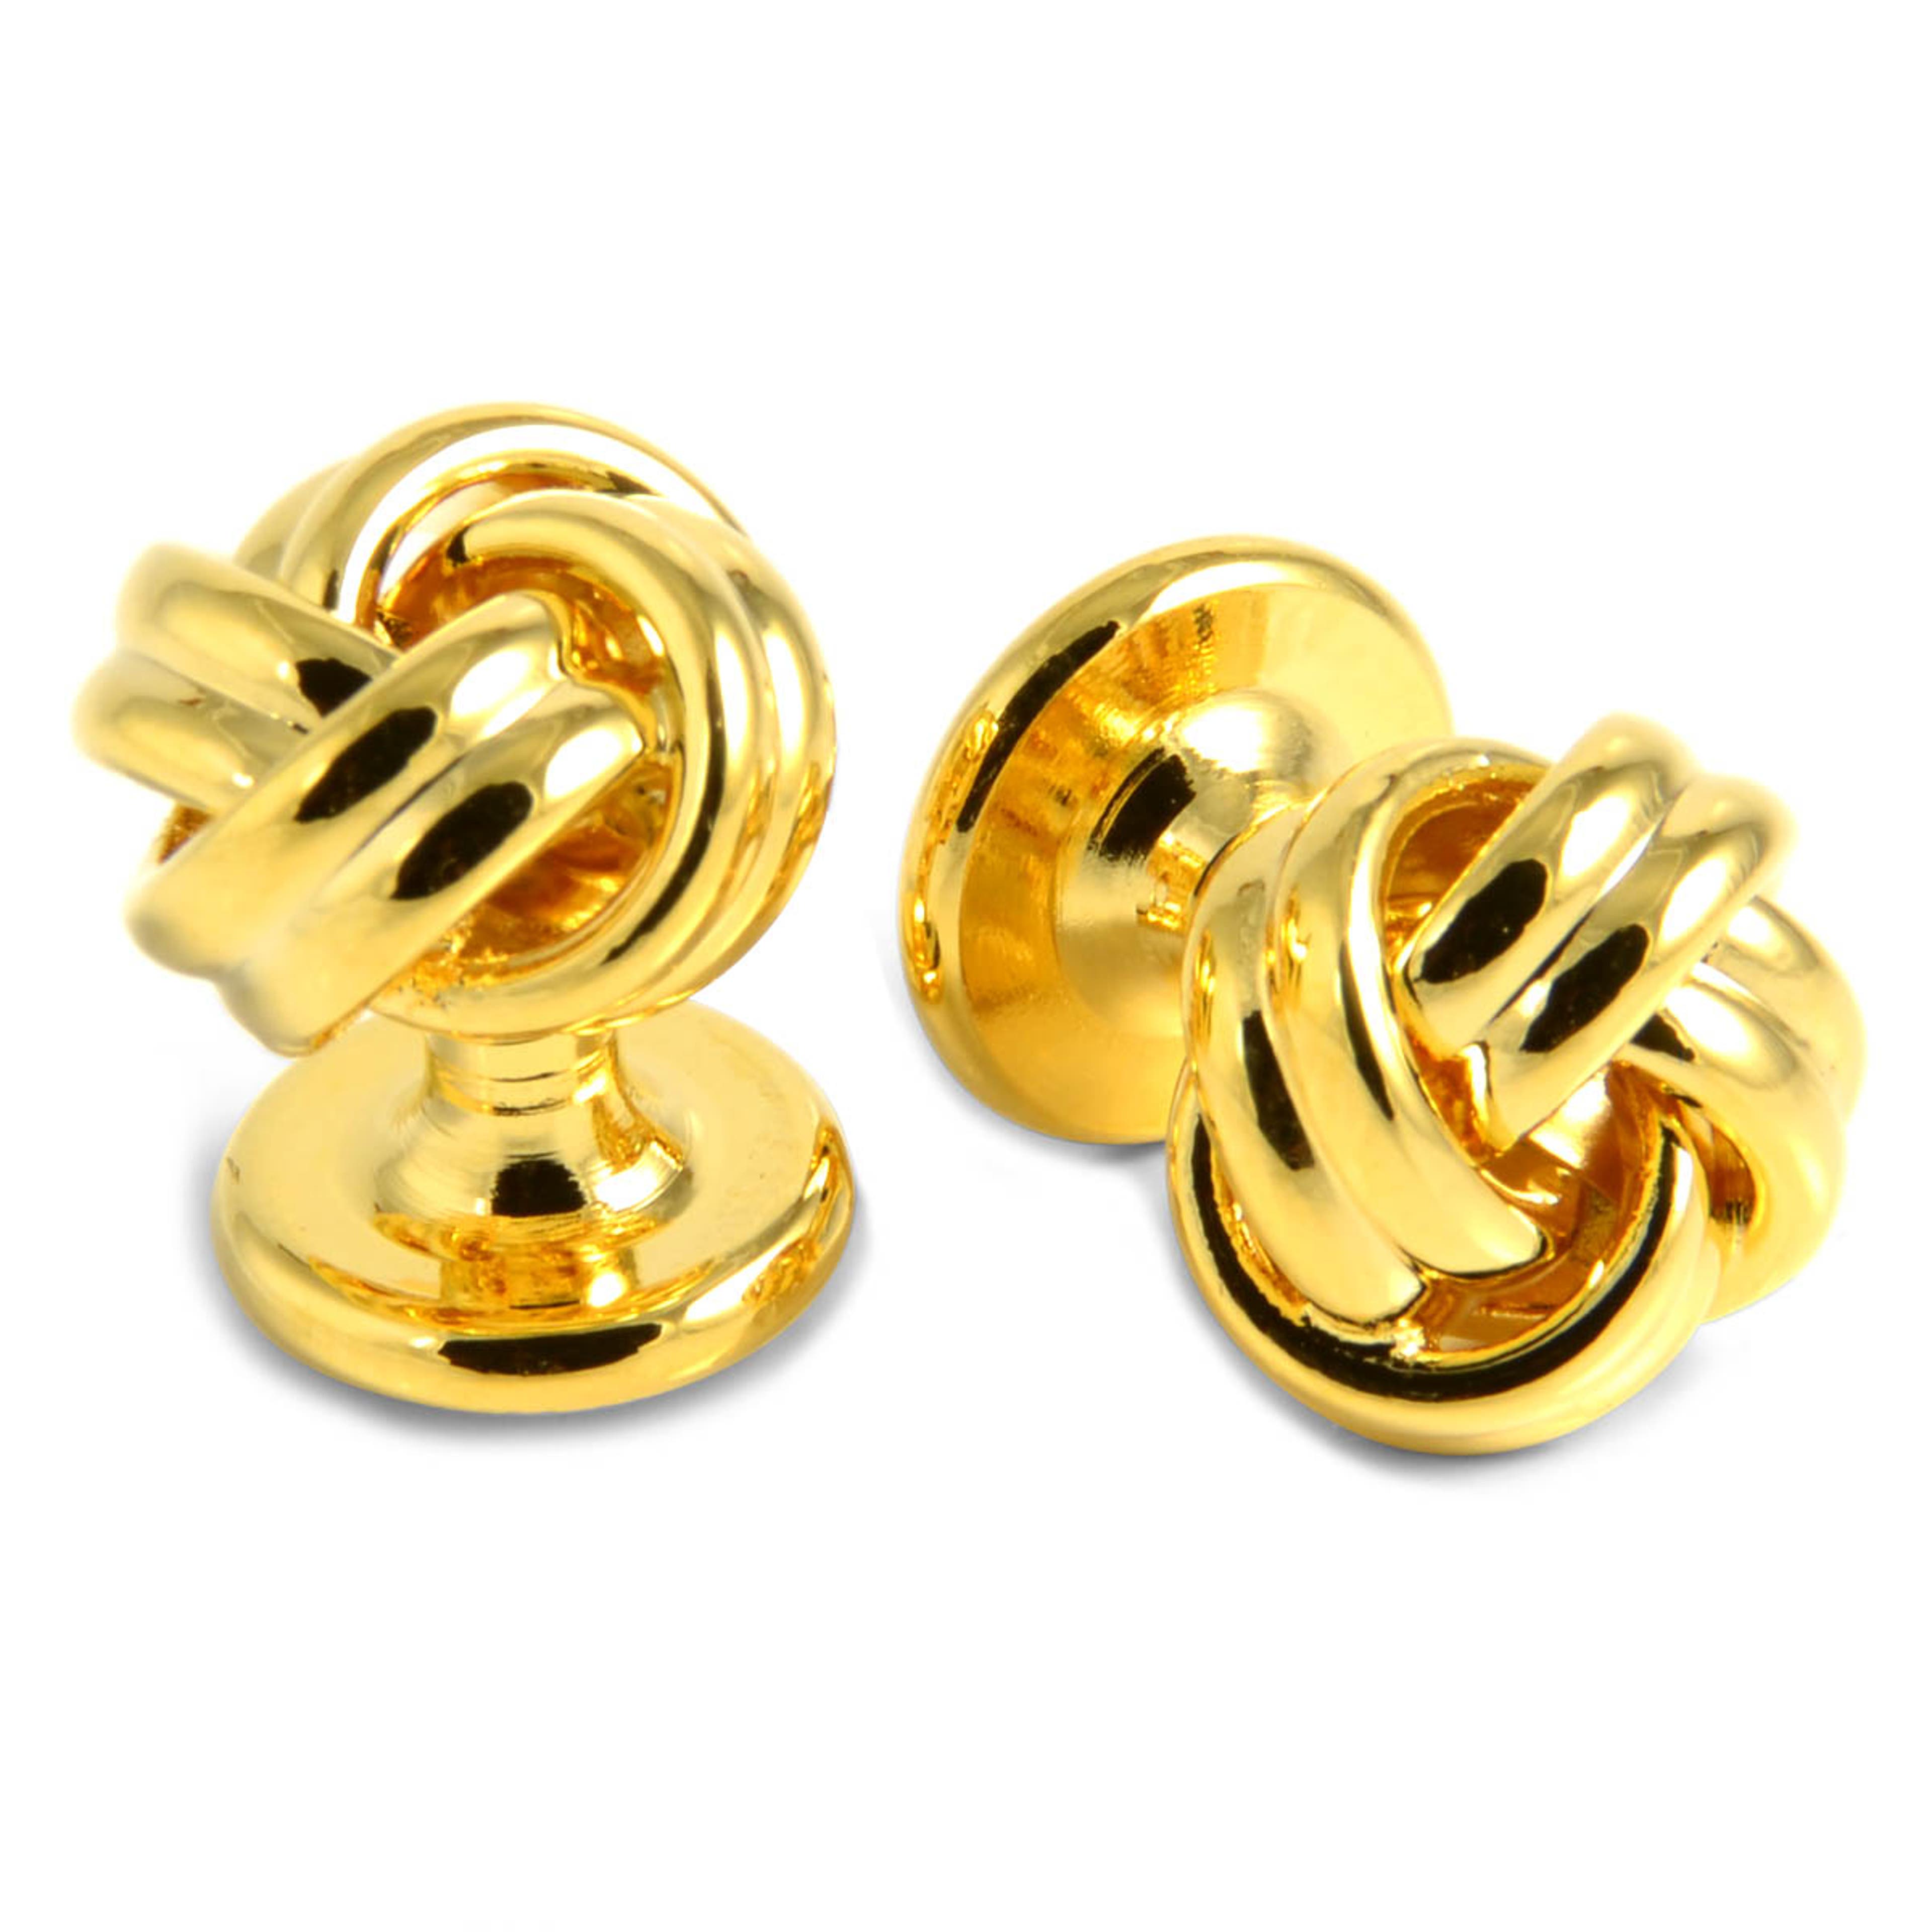 Gold-Tone Double Twisted Cufflinks